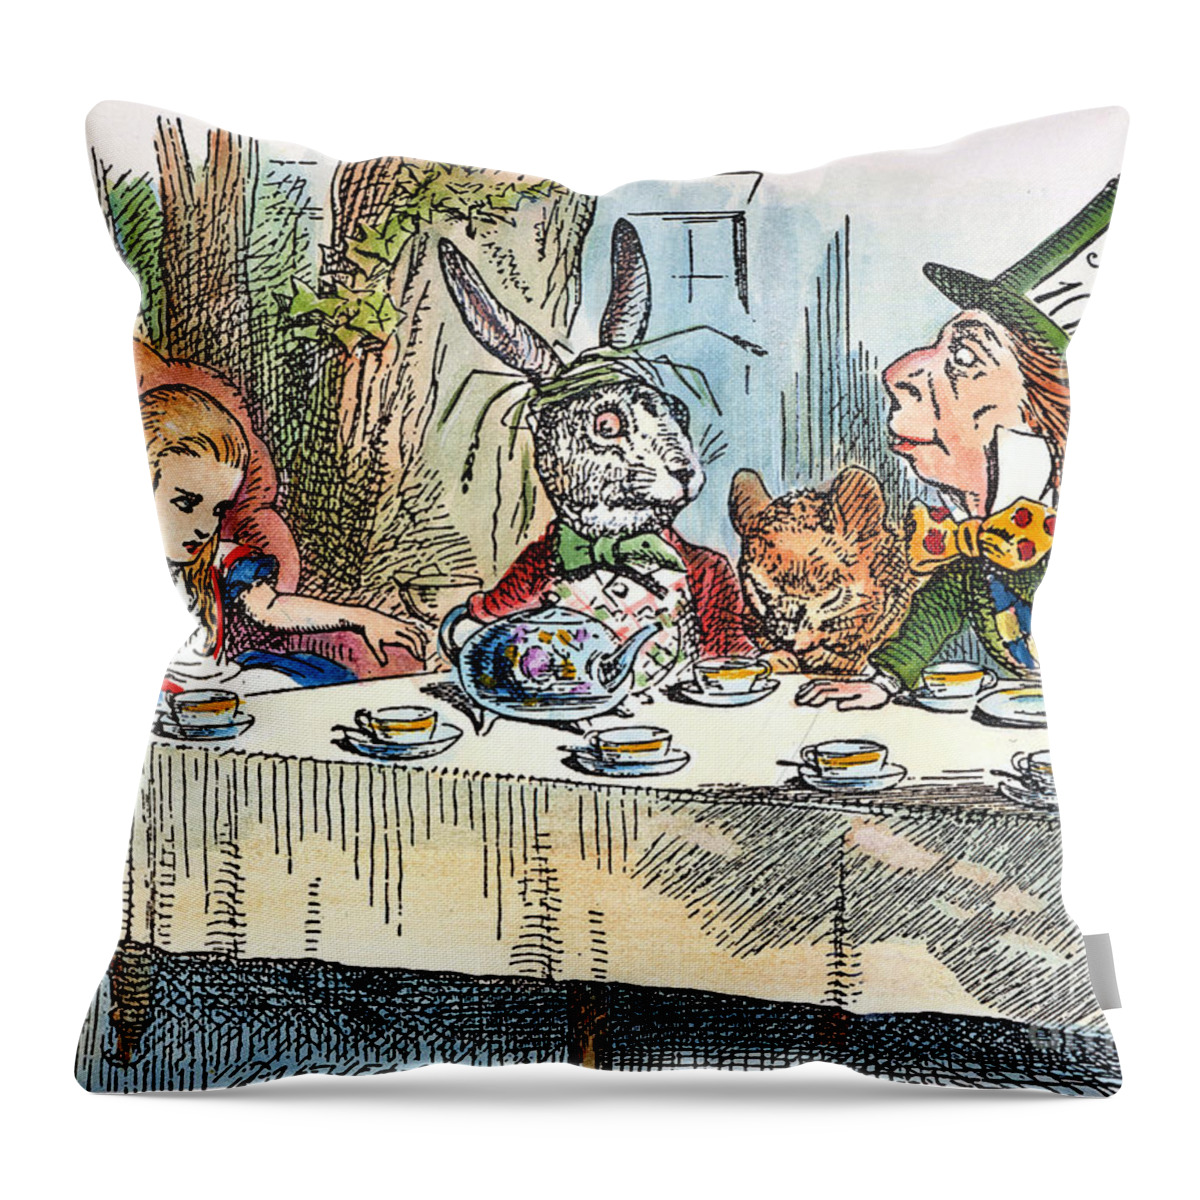 1865 Throw Pillow featuring the drawing Alices Mad-tea Party, 1865 by Granger